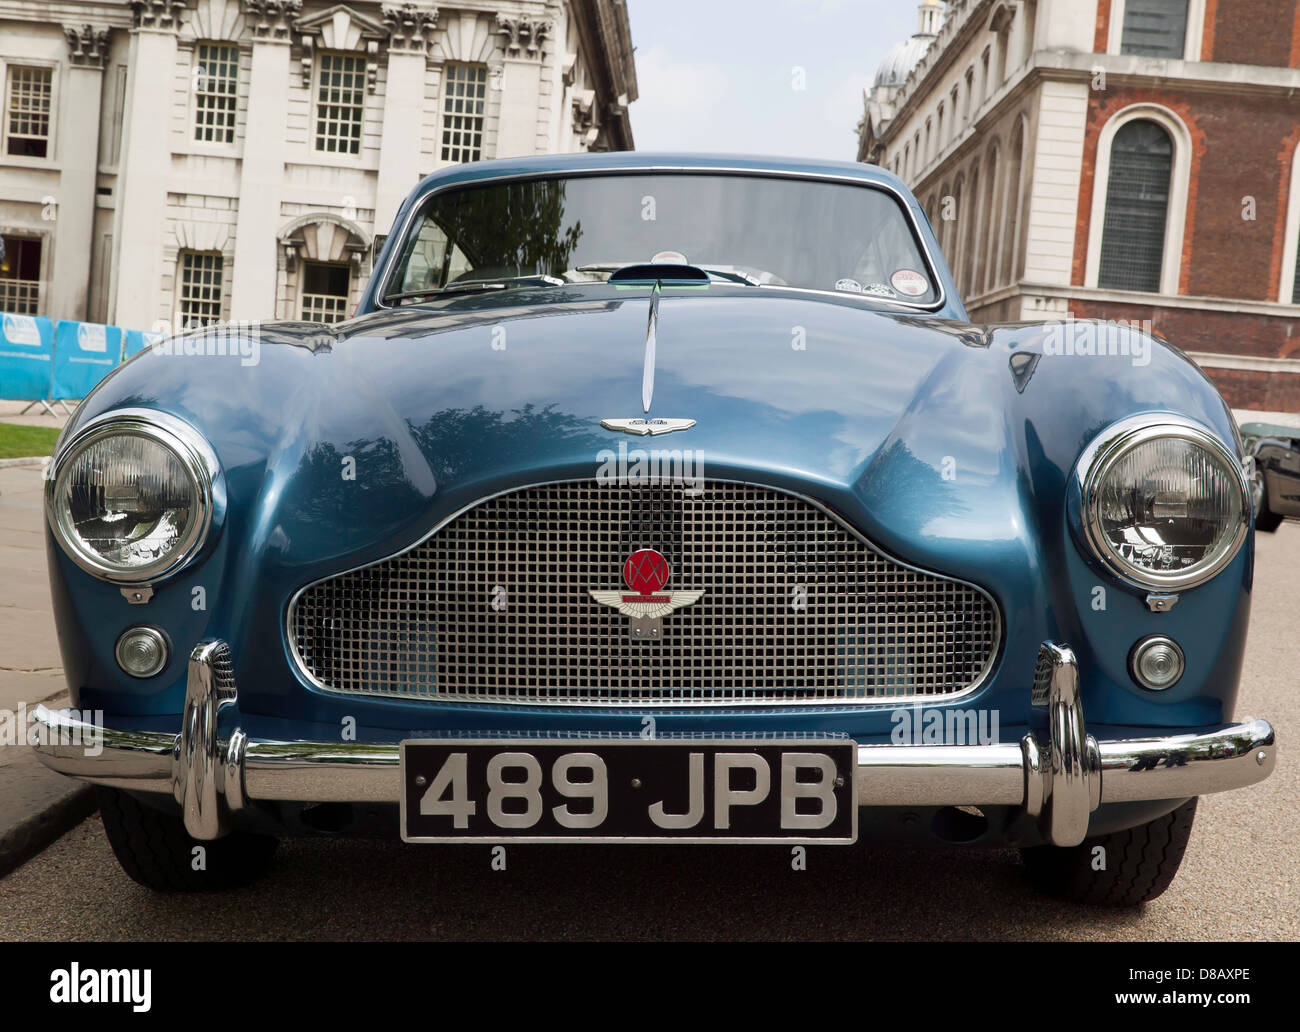 Front view of a  vintage 1959, Blue, Aston Martin DB Mark III  on display at the Old Royal Naval College, Greenwich. Stock Photo